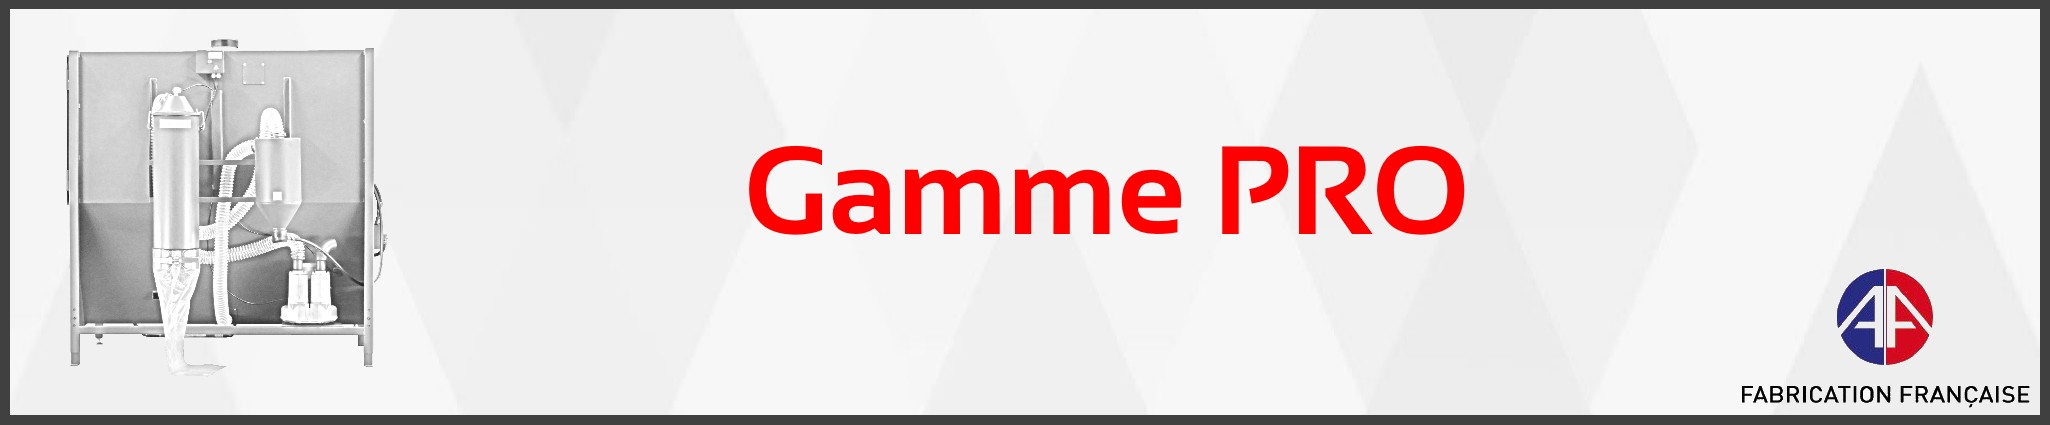 Gamme PRO